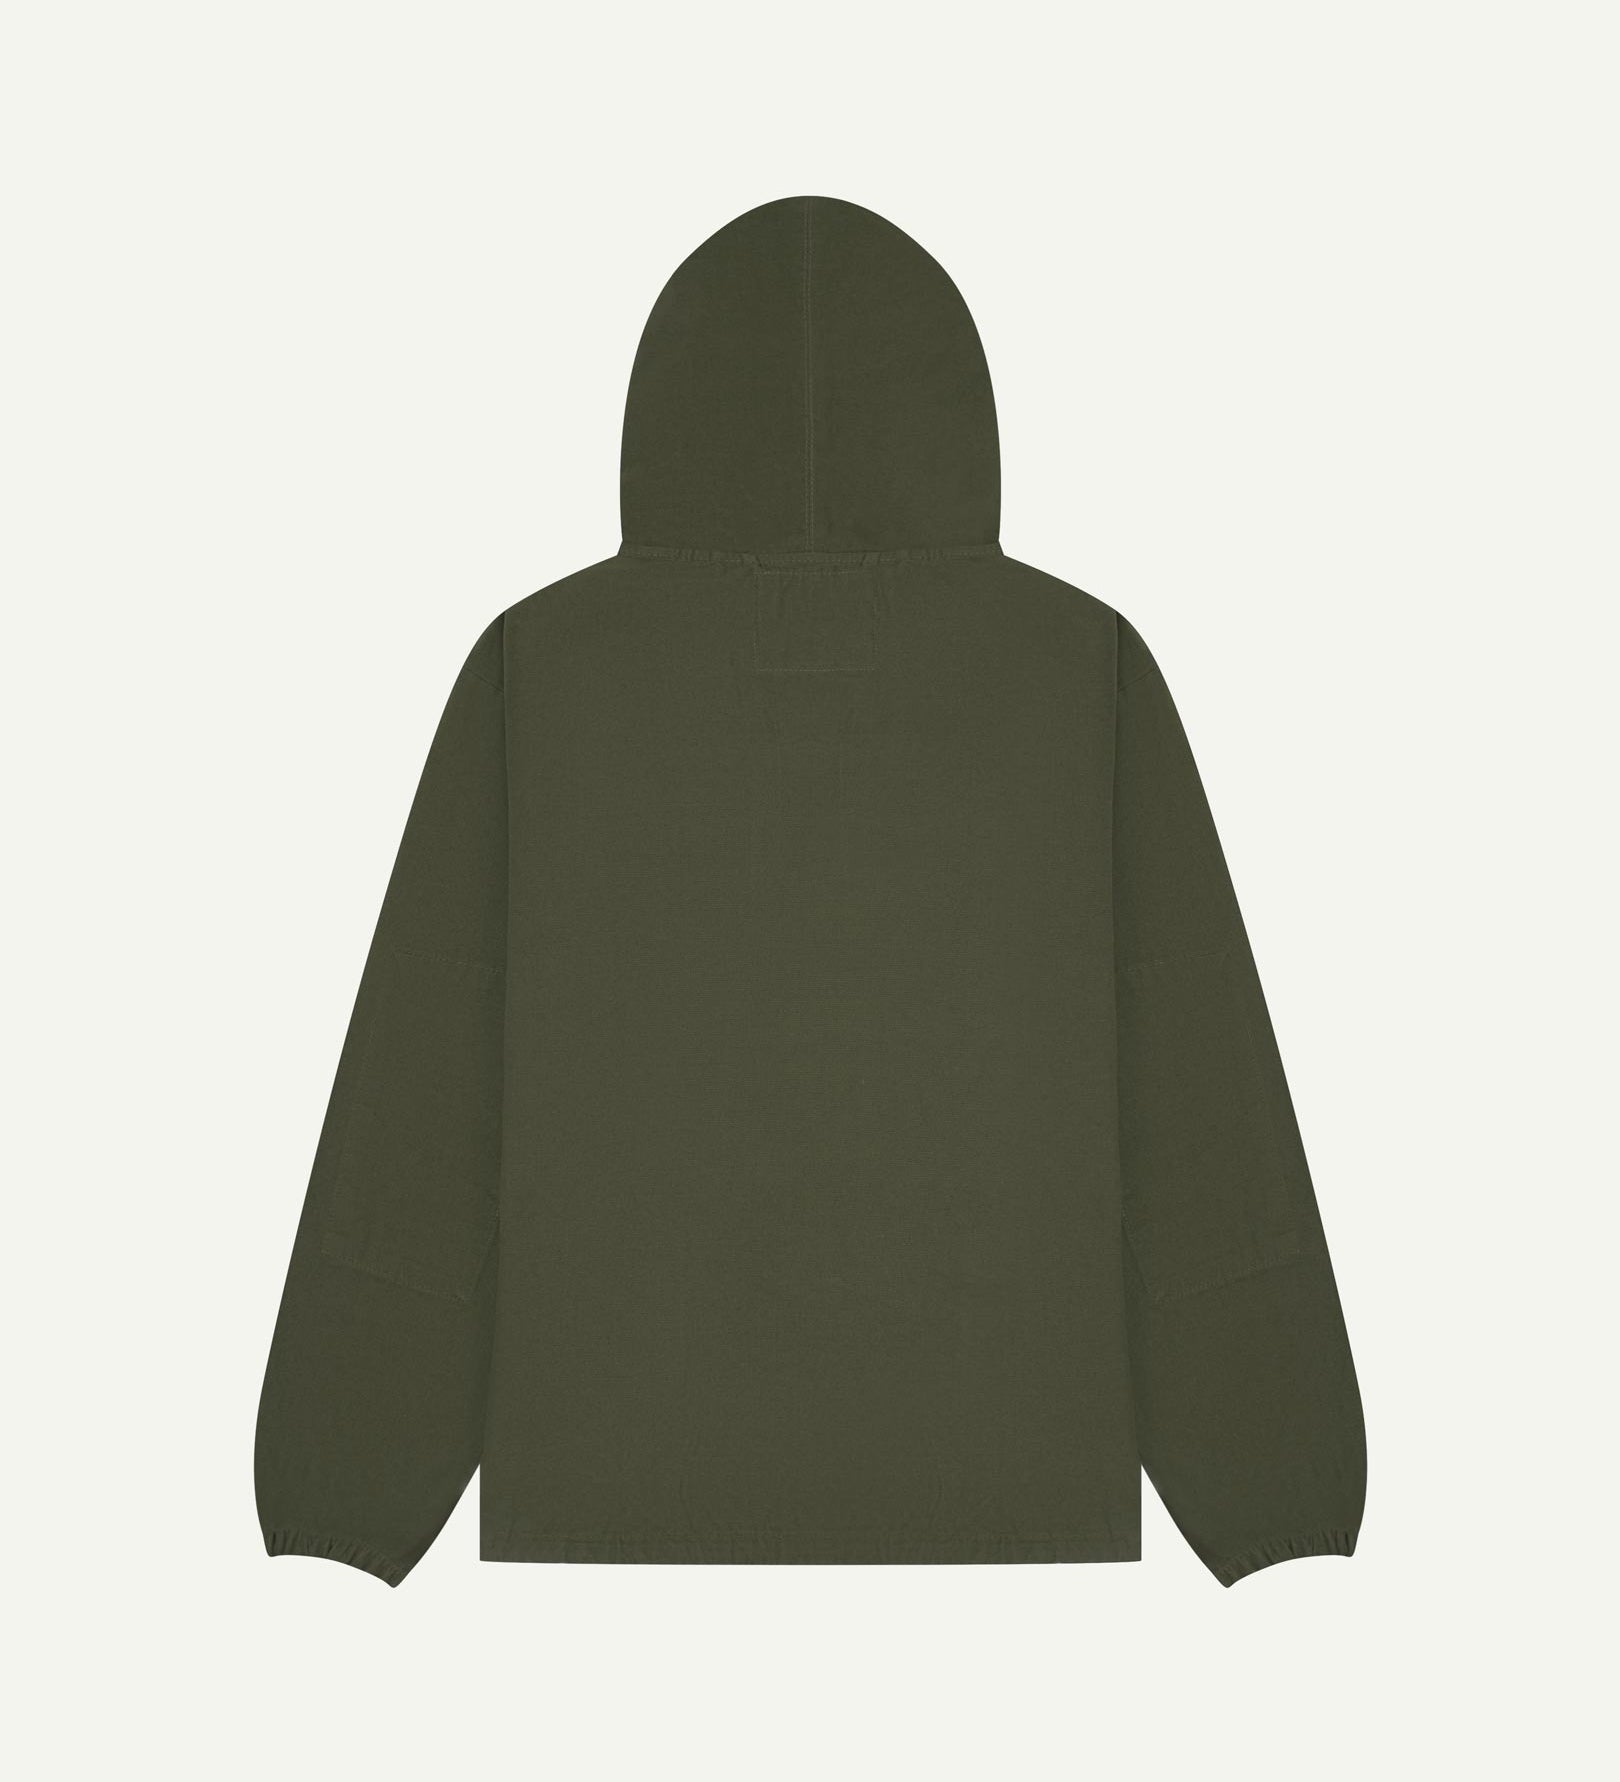 Back flat shot of Uskees vine green organic cotton smock showing reinforced elbows, back of hood and loose silhouette.